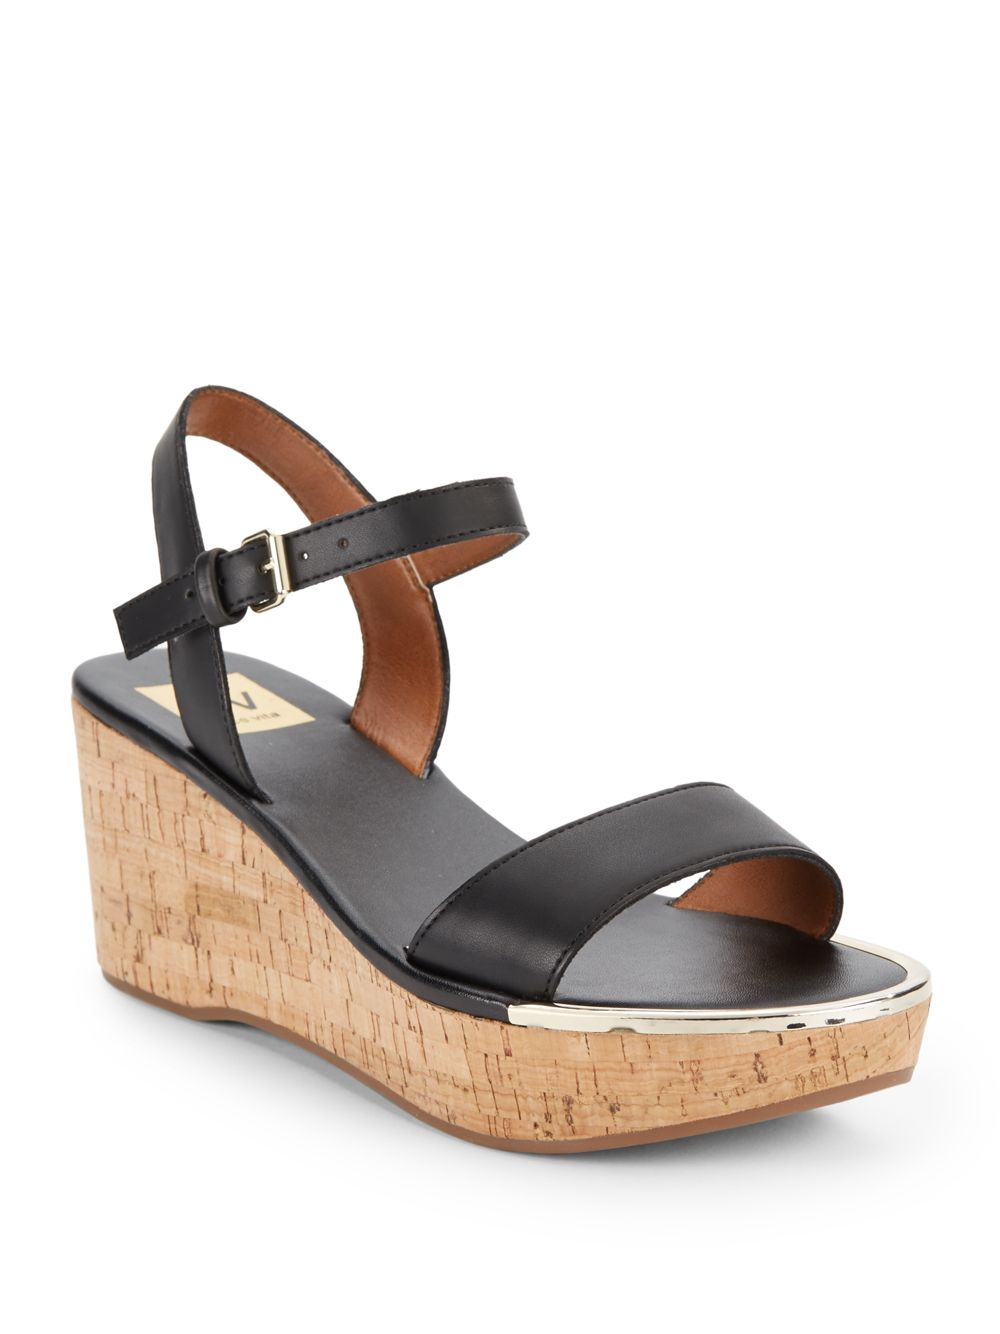 DV by Dolce Vita Cairy Cork Wedge Sandals in Black - Lyst